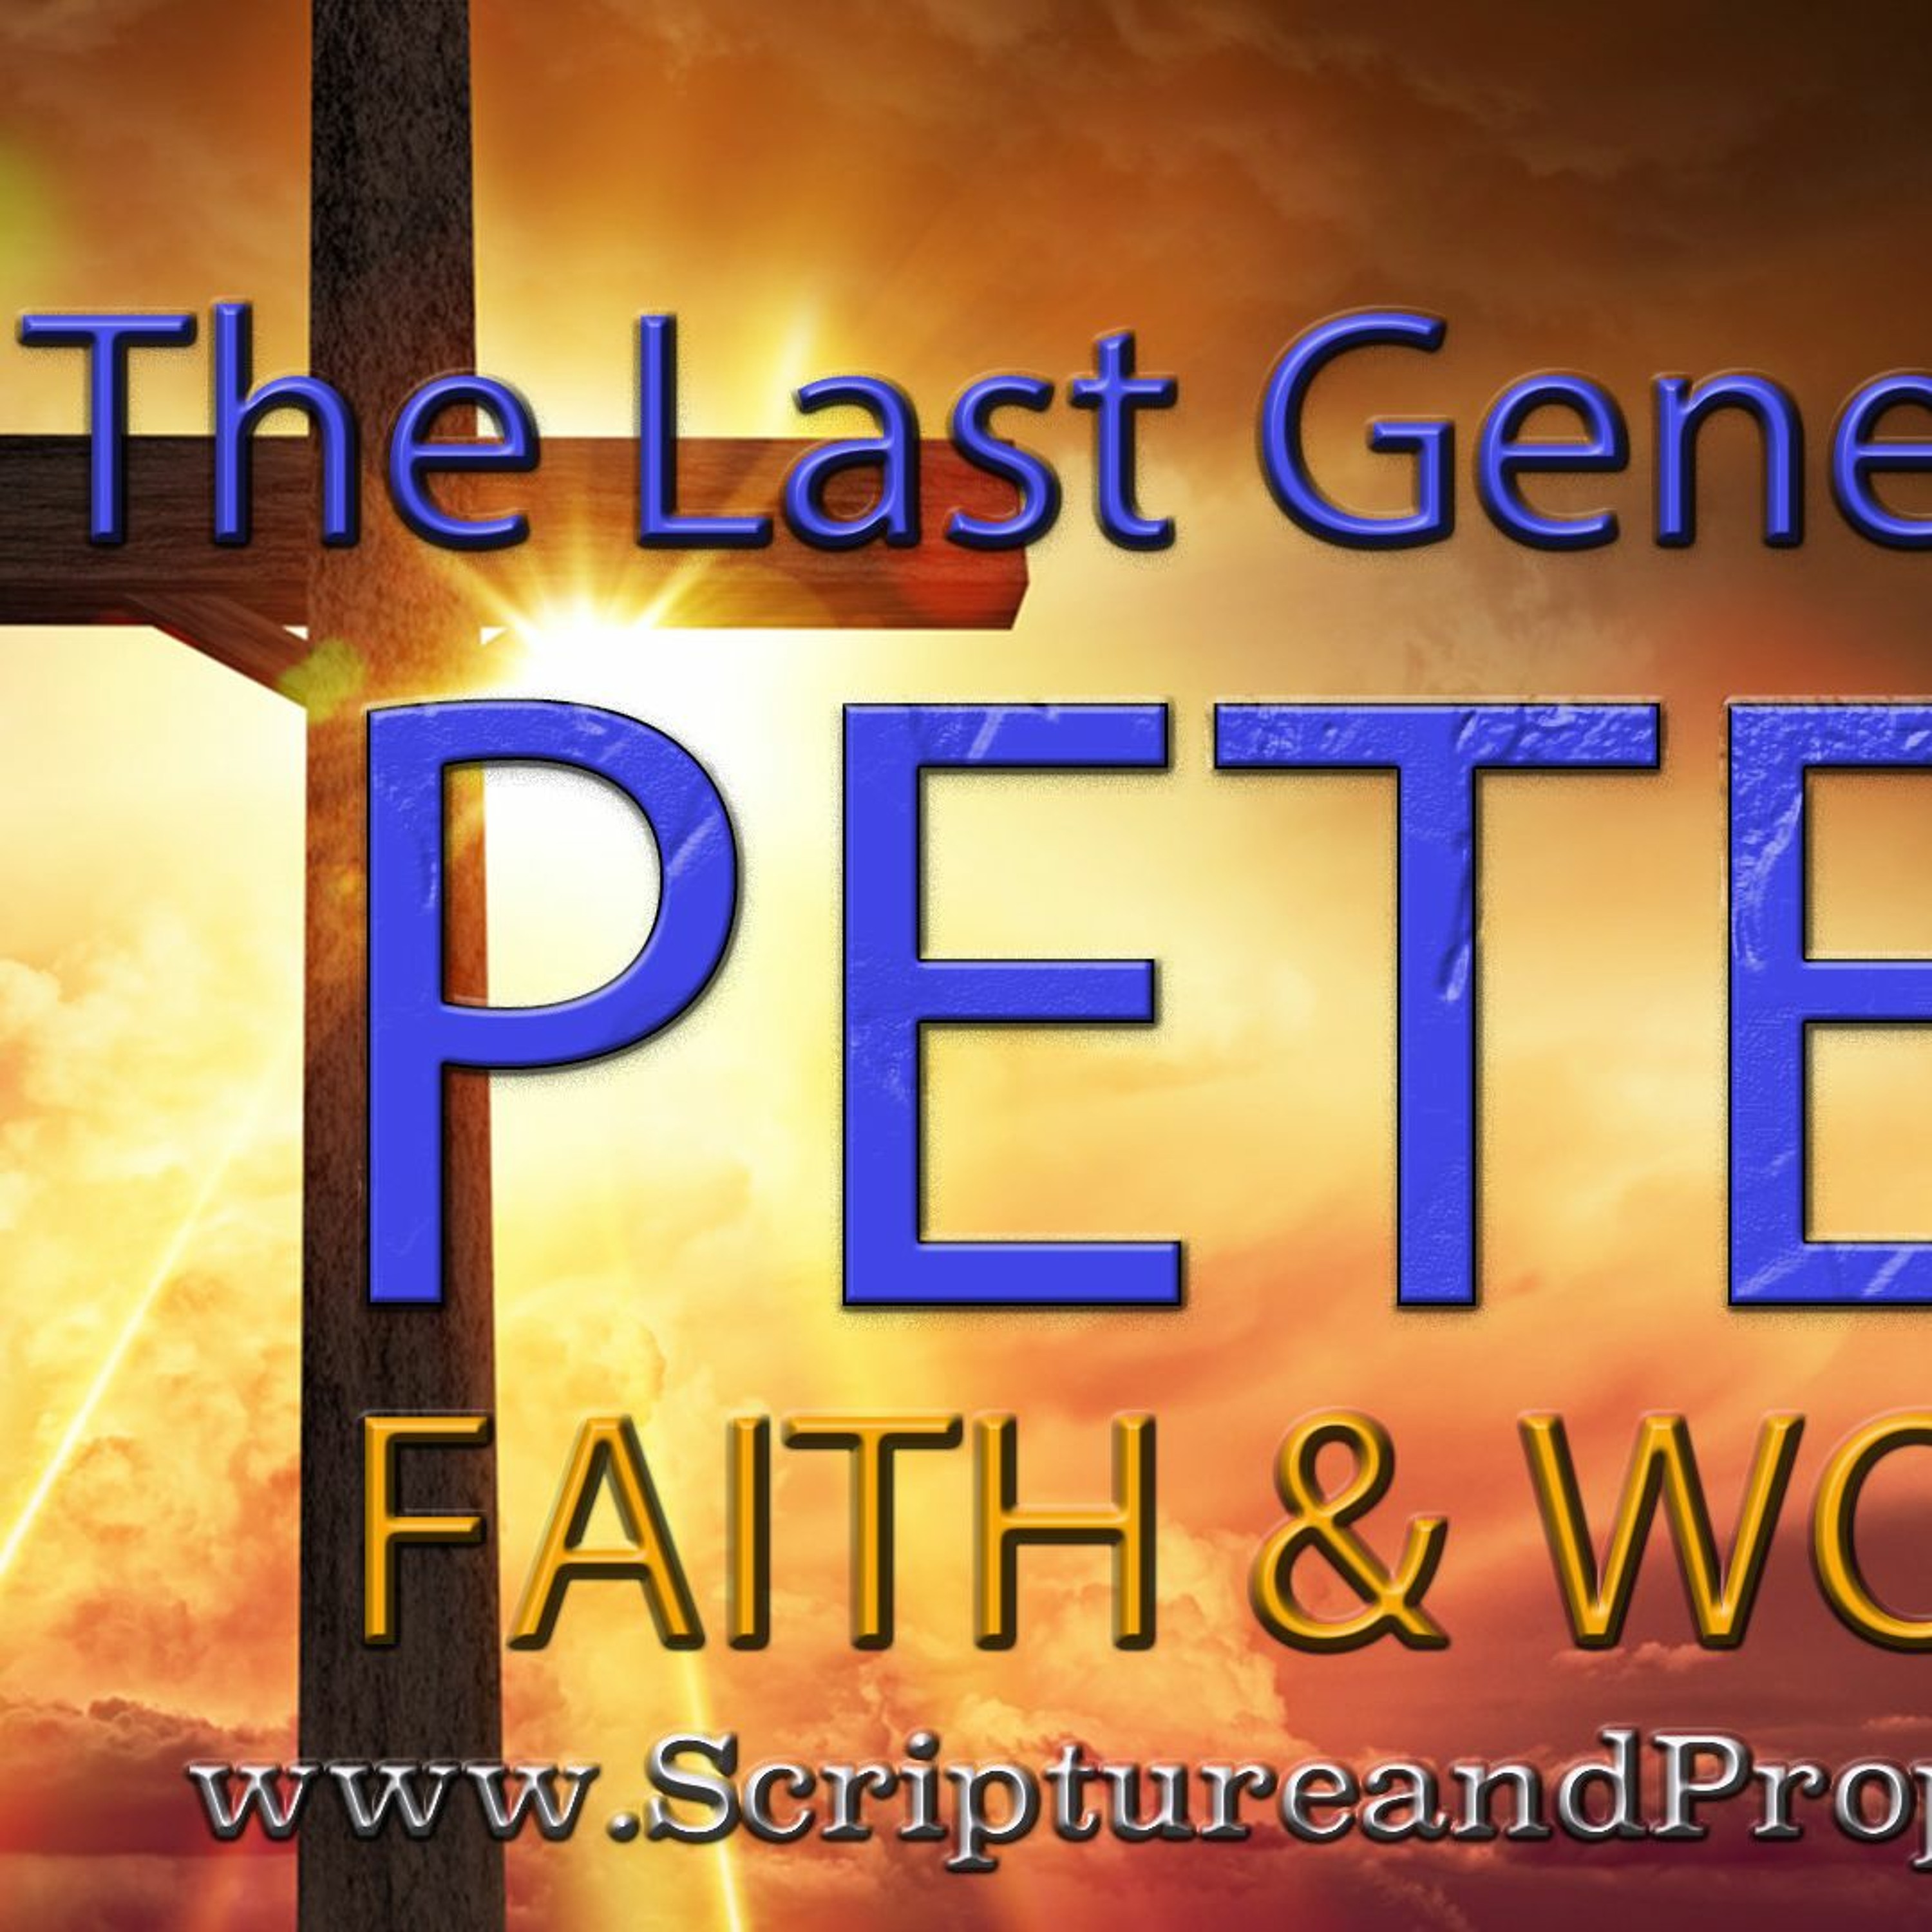 2 Peter - Faith & Works: Chapter 1 - Confirm Your Calling and Election